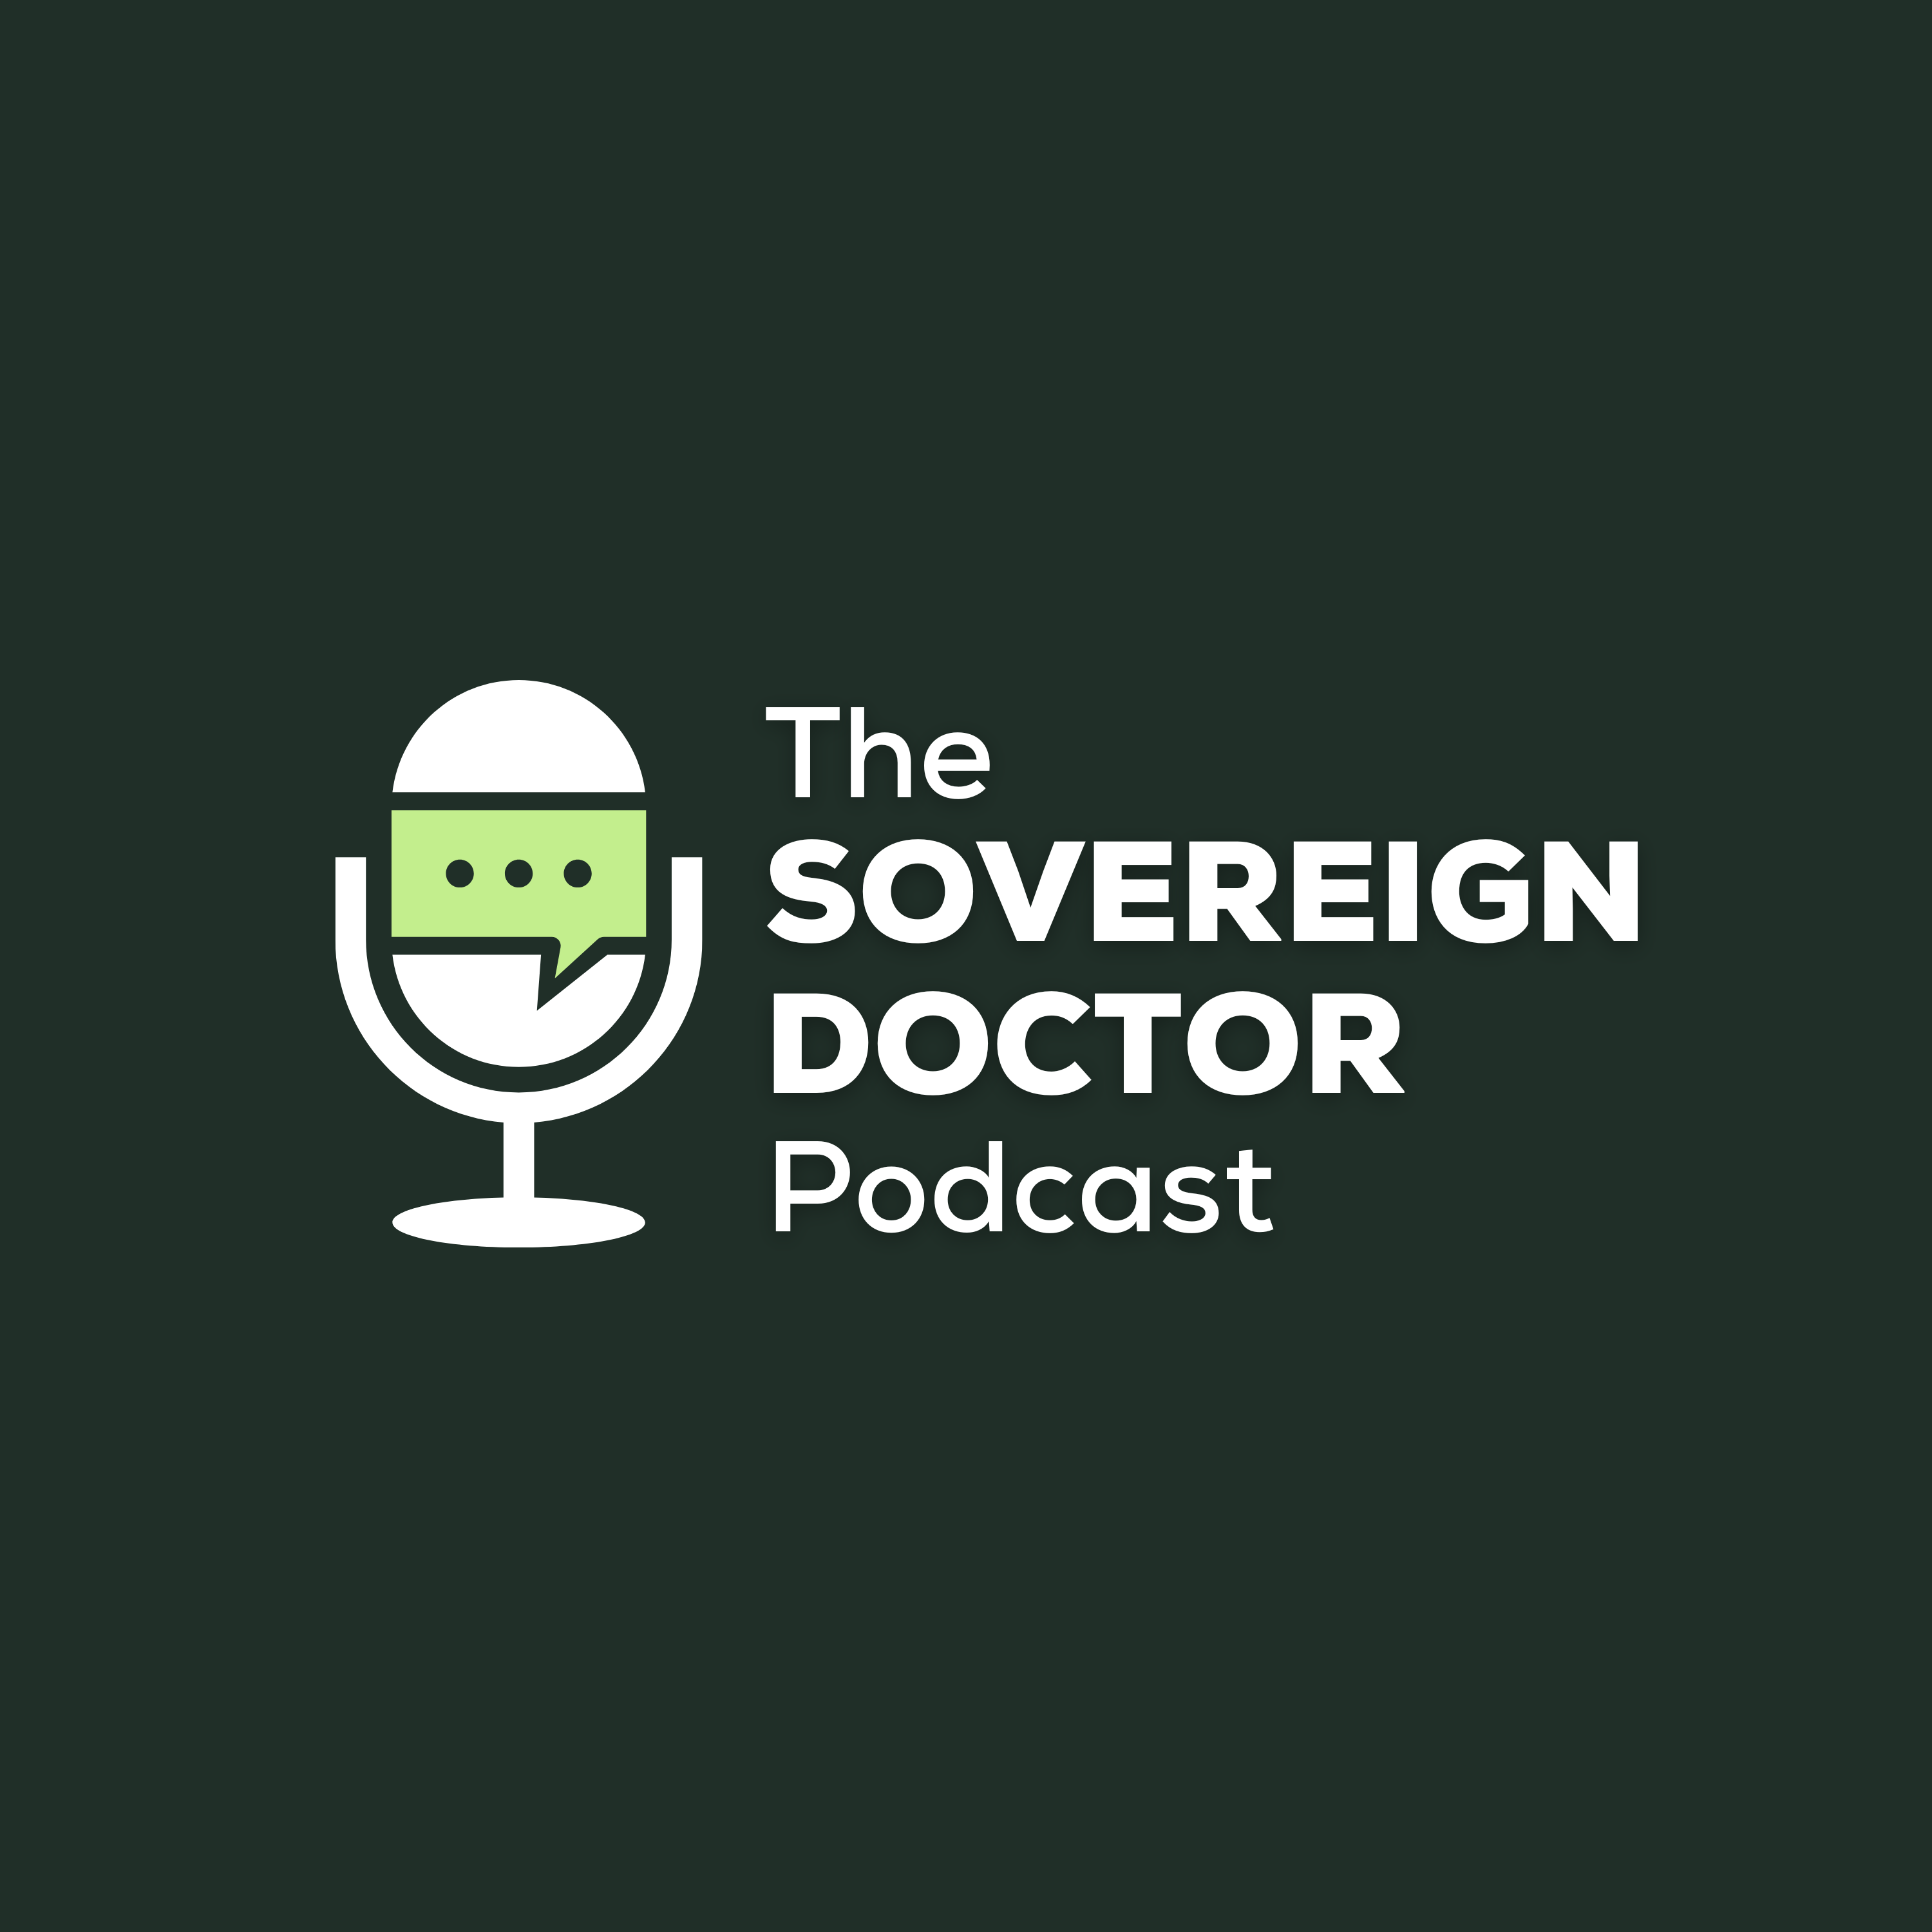 The Sovereign Doctor Podcast